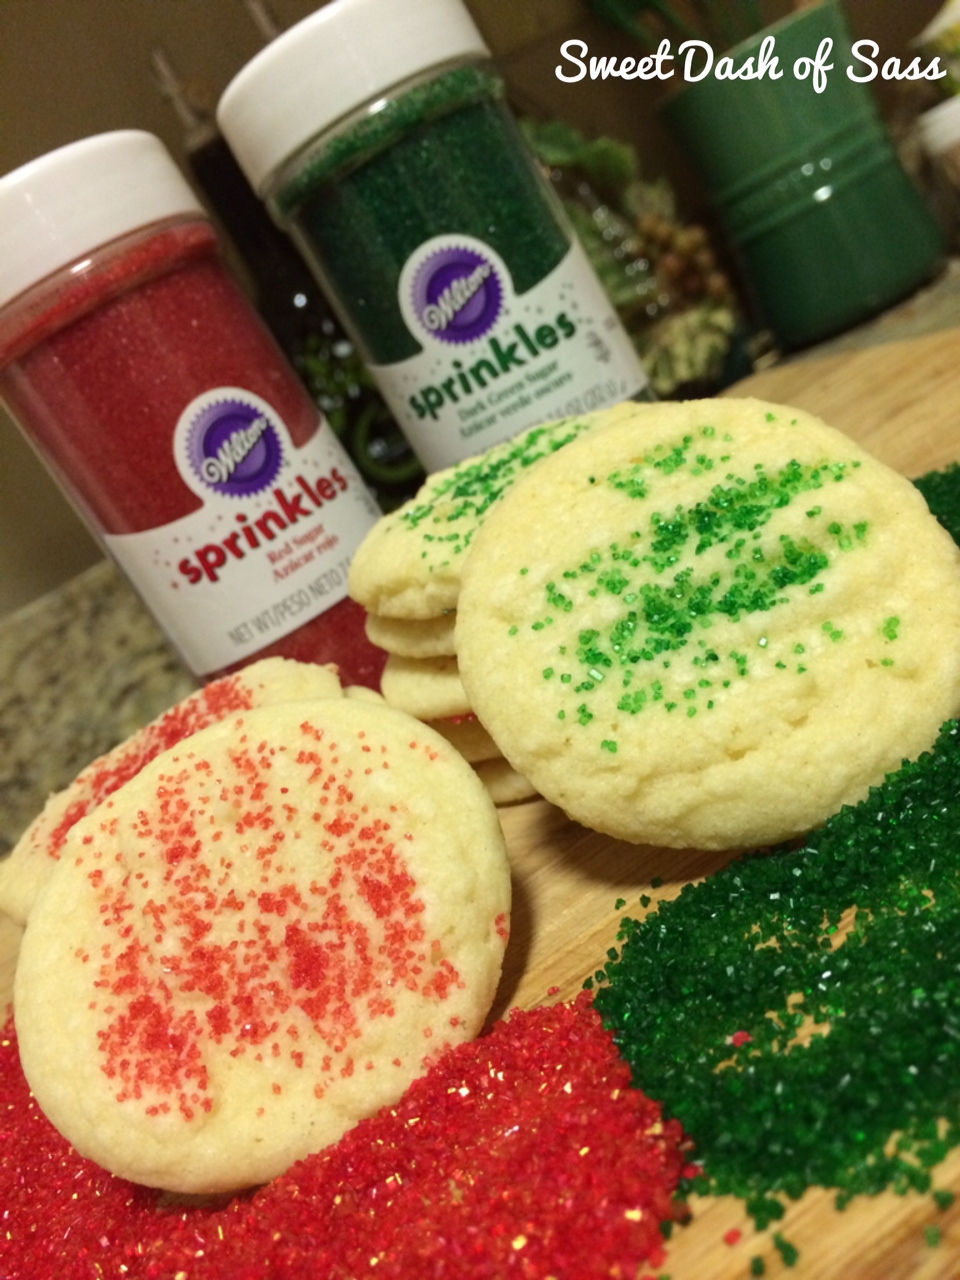 Creamy Butter Cookies - 25 Days of Christmas - www.SweetDashofSass.com